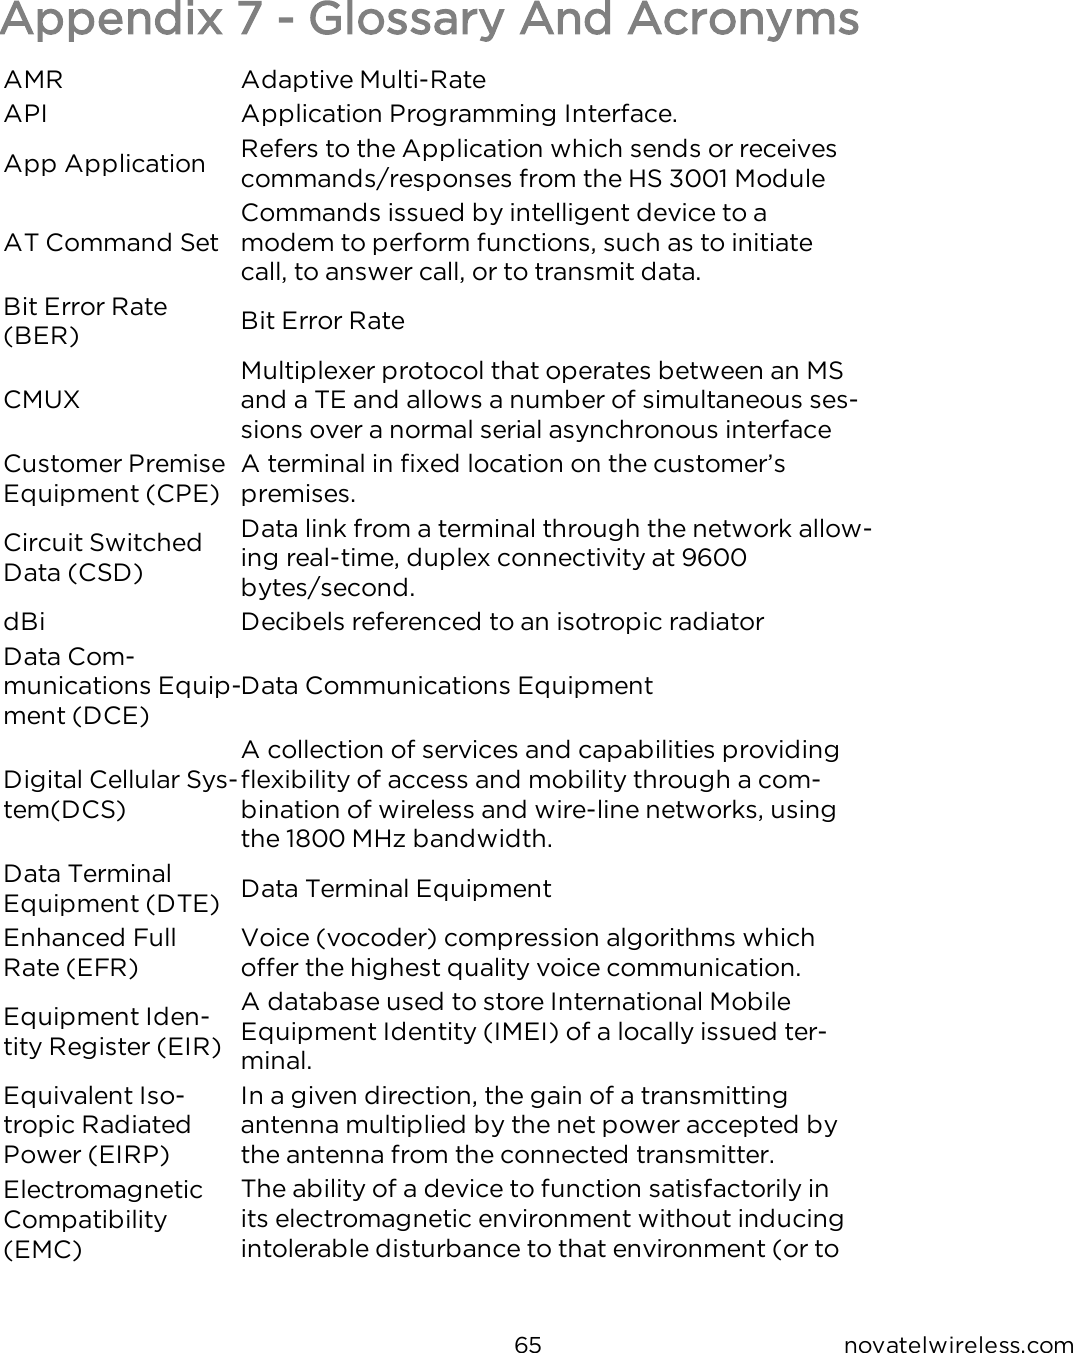 65 novatelwireless.comAppendix 7 - Glossary And AcronymsAMR Adaptive Multi-RateAPI Application Programming Interface.App Application Refers to the Application which sends or receives commands/responses from the HS 3001 ModuleAT Command SetCommands issued by intelligent device to a modem to perform functions, such as to initiate call, to answer call, or to transmit data.Bit Error Rate (BER) Bit Error RateCMUXMultiplexer protocol that operates between an MS and a TE and allows a number of simultaneous ses-sions over a normal serial asynchronous interfaceCustomer Premise Equipment (CPE)A terminal in fixed location on the customer’s premises.Circuit Switched Data (CSD)Data link from a terminal through the network allow-ing real-time, duplex connectivity at 9600 bytes/second.dBi Decibels referenced to an isotropic radiatorData Com-munications Equip-ment (DCE)Data Communications EquipmentDigital Cellular Sys-tem(DCS)A collection of services and capabilities providing flexibility of access and mobility through a com-bination of wireless and wire-line networks, using the 1800 MHz bandwidth.Data Terminal Equipment (DTE) Data Terminal EquipmentEnhanced Full Rate (EFR)Voice (vocoder) compression algorithms which offer the highest quality voice communication.Equipment Iden-tity Register (EIR)A database used to store International Mobile Equipment Identity (IMEI) of a locally issued ter-minal.Equivalent Iso-tropic Radiated Power (EIRP)In a given direction, the gain of a transmitting antenna multiplied by the net power accepted by the antenna from the connected transmitter.Electromagnetic Compatibility (EMC)The ability of a device to function satisfactorily in its electromagnetic environment without inducing intolerable disturbance to that environment (or to 